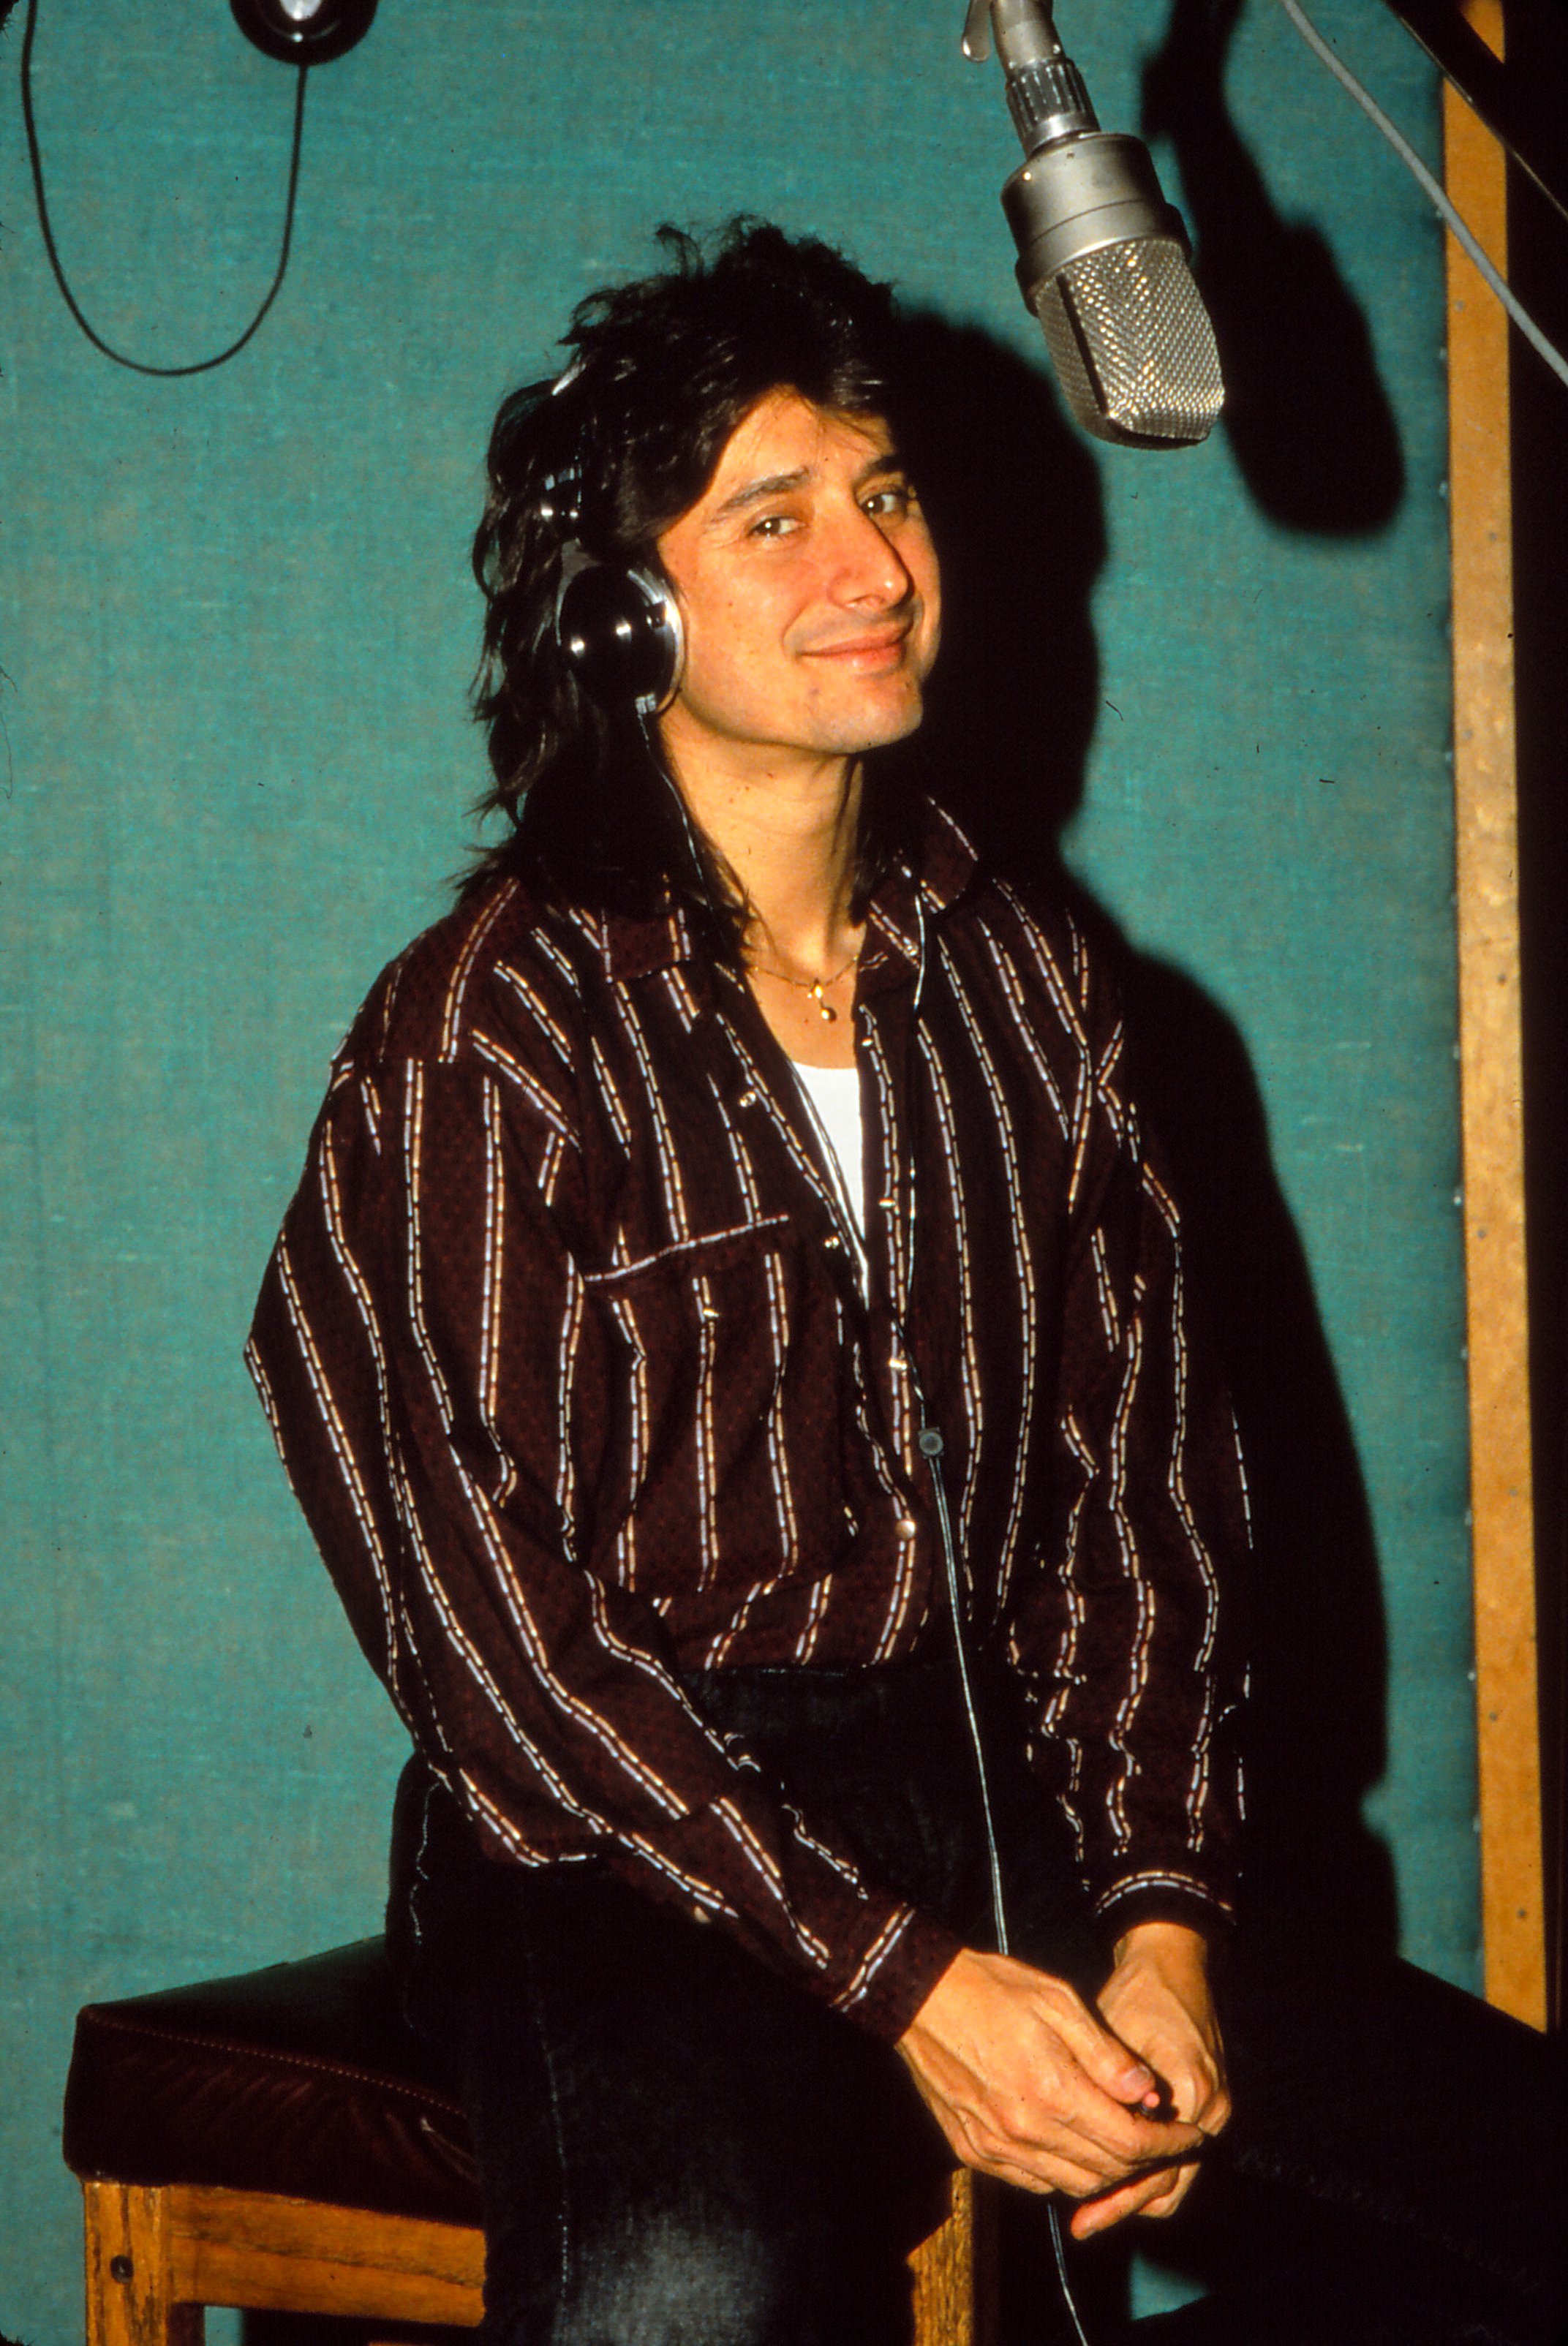 Junger Steve Perry, 1979 | Quelle: Getty Images